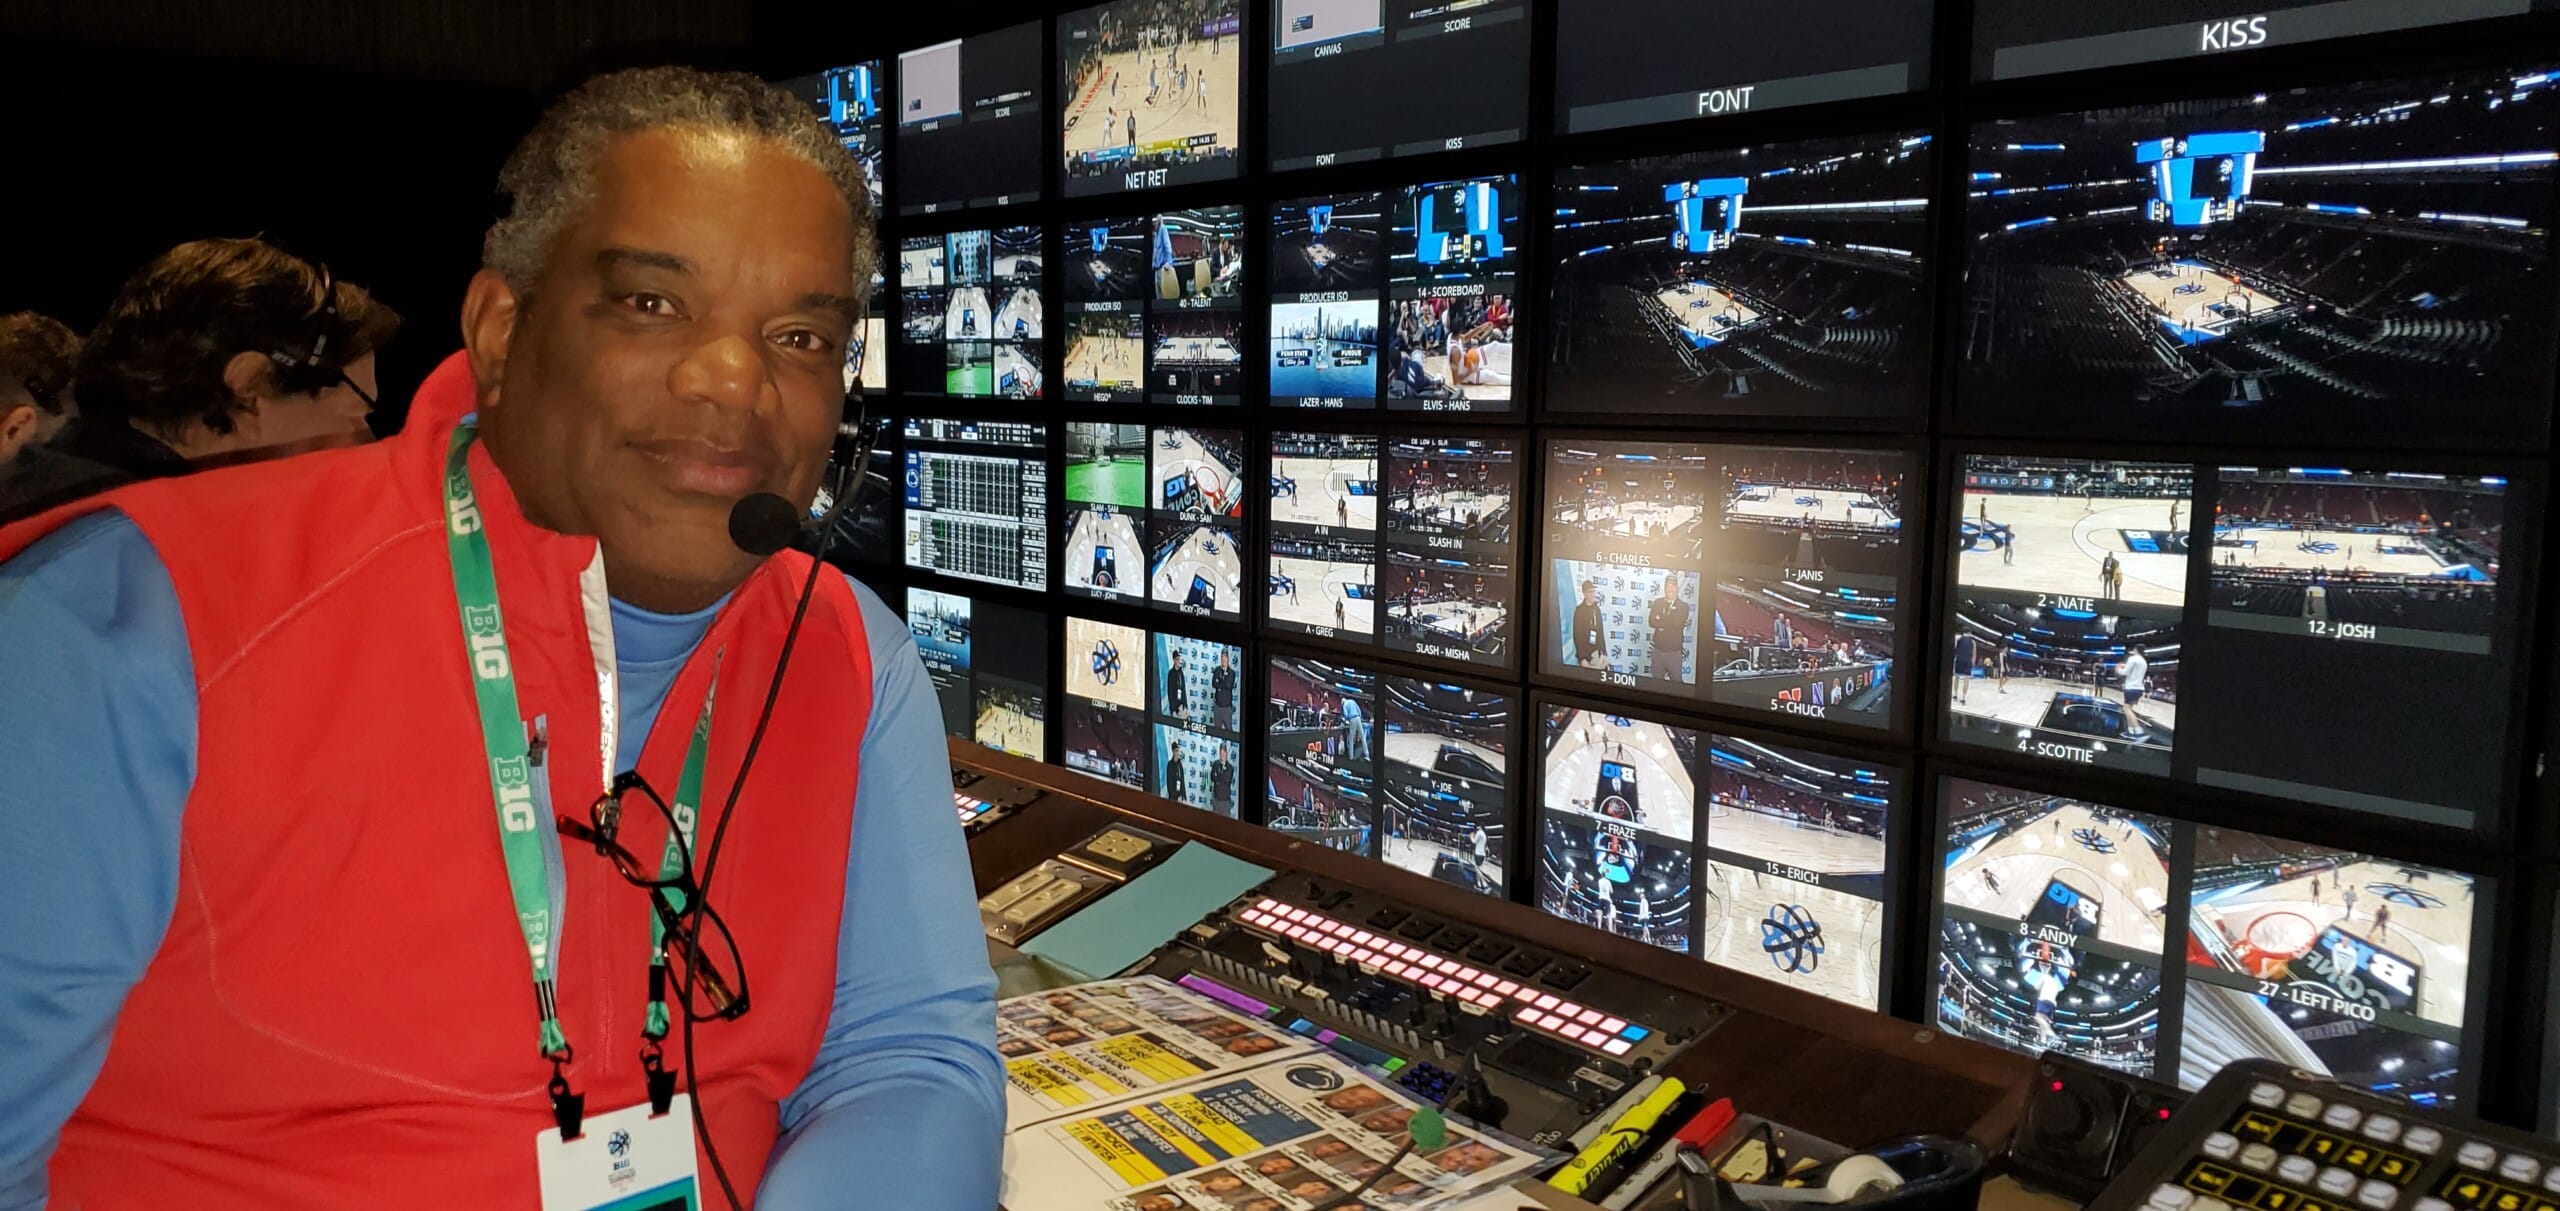 Mark Grant is poised to make history at CBS Sports.